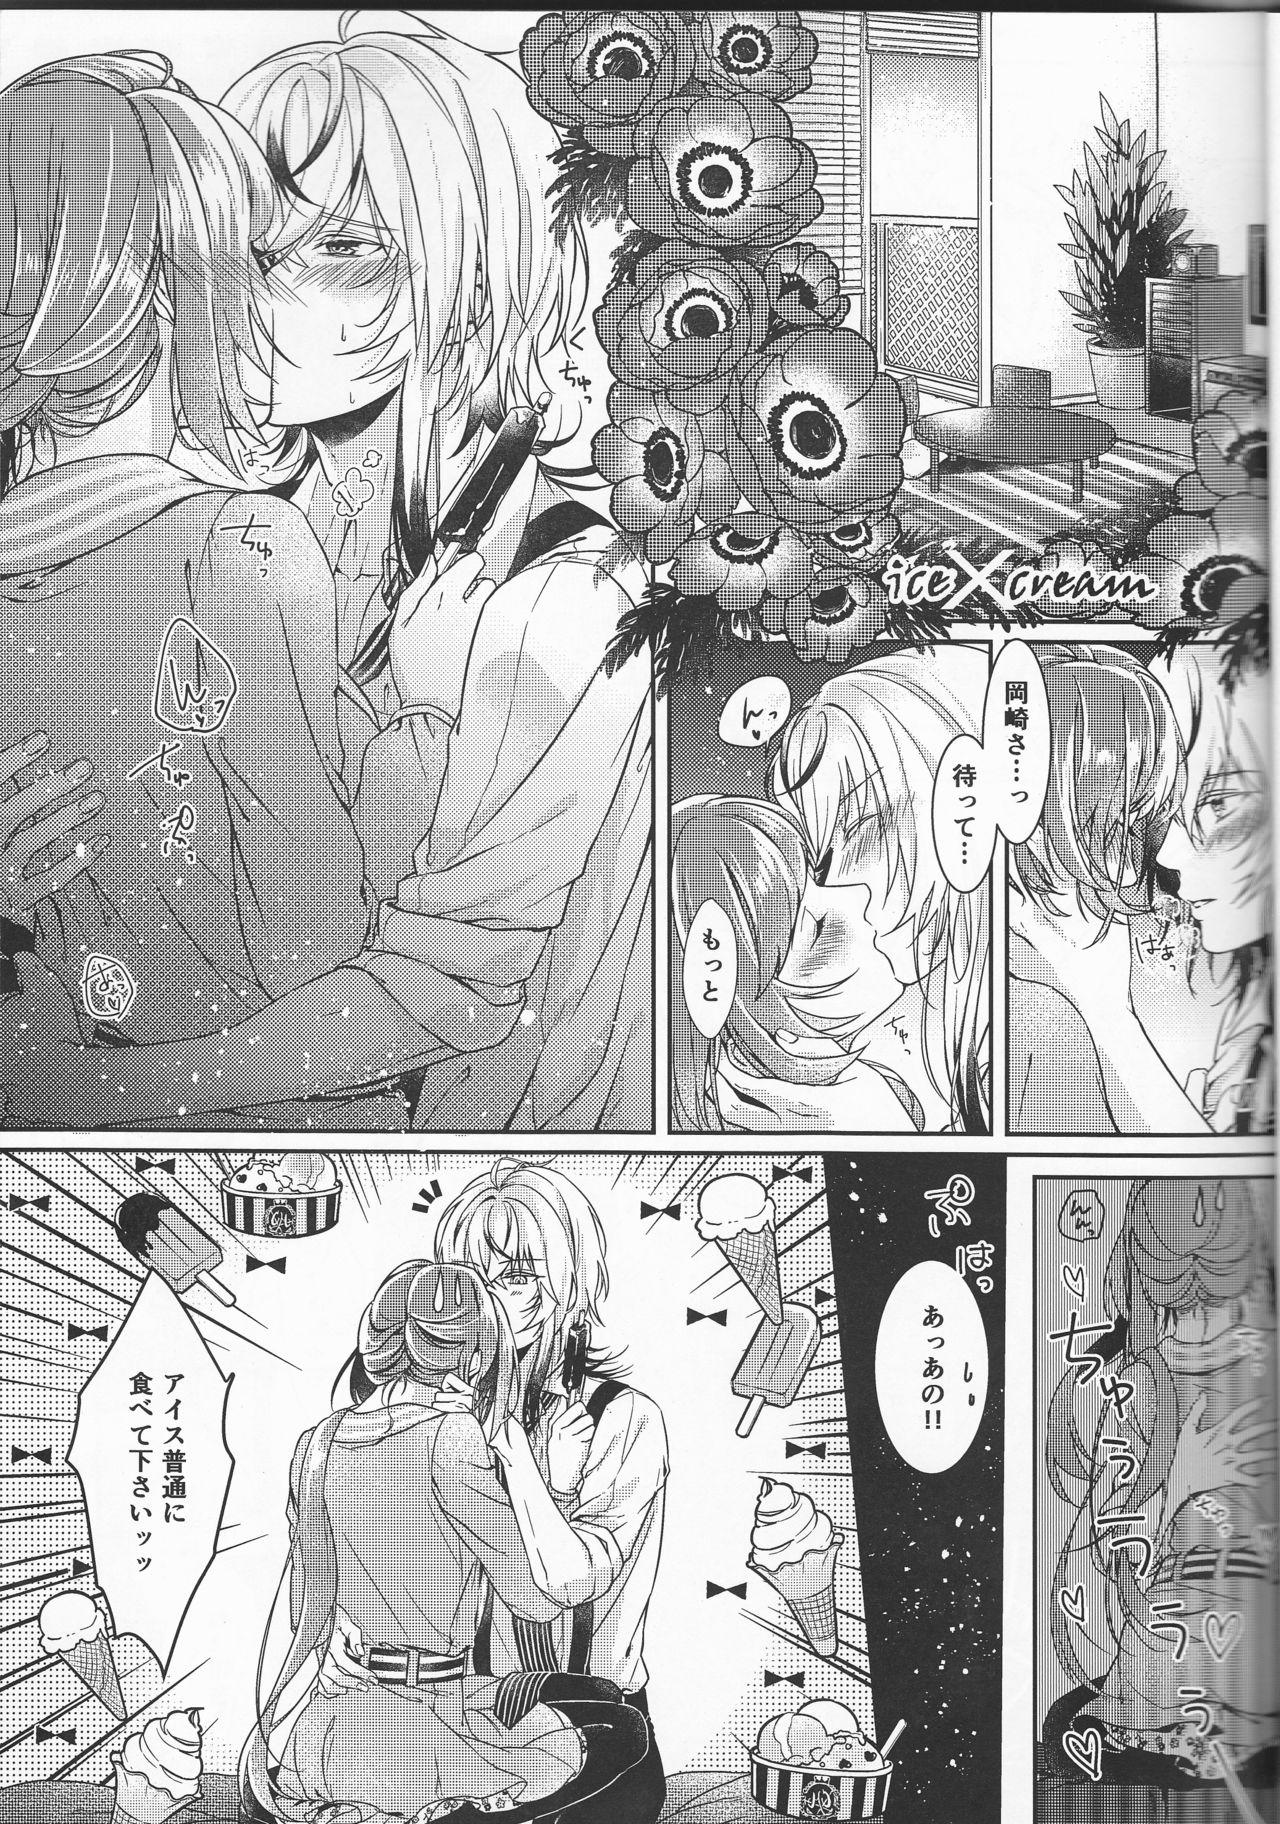 Group Sex Catch a Cold? - Collar x malice Curious - Page 9